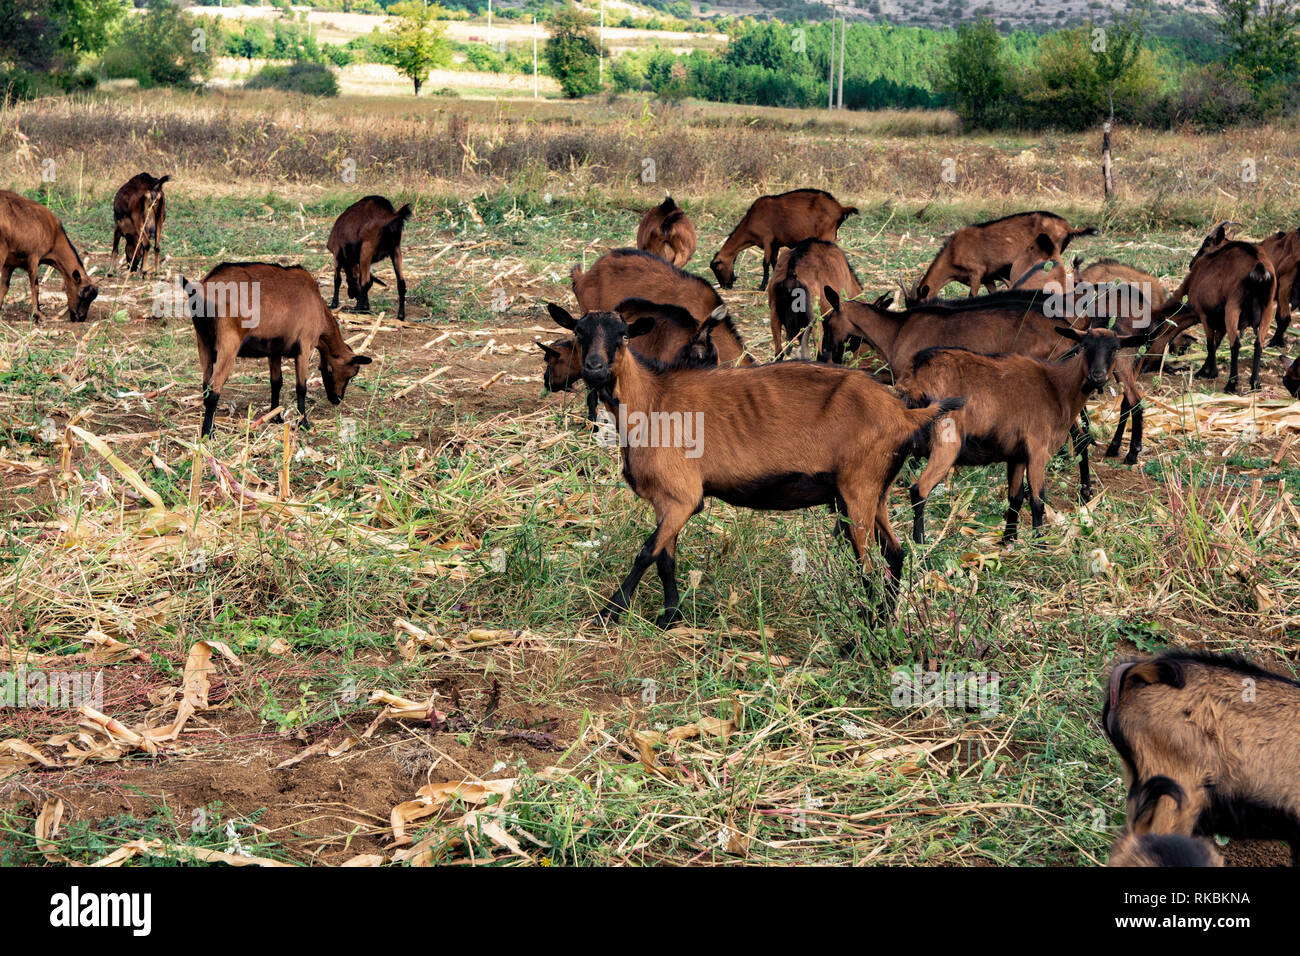 The herd of mountain goats brown color, the Alpinka race, on the meadow grazing in the field of corn. Stock Photo